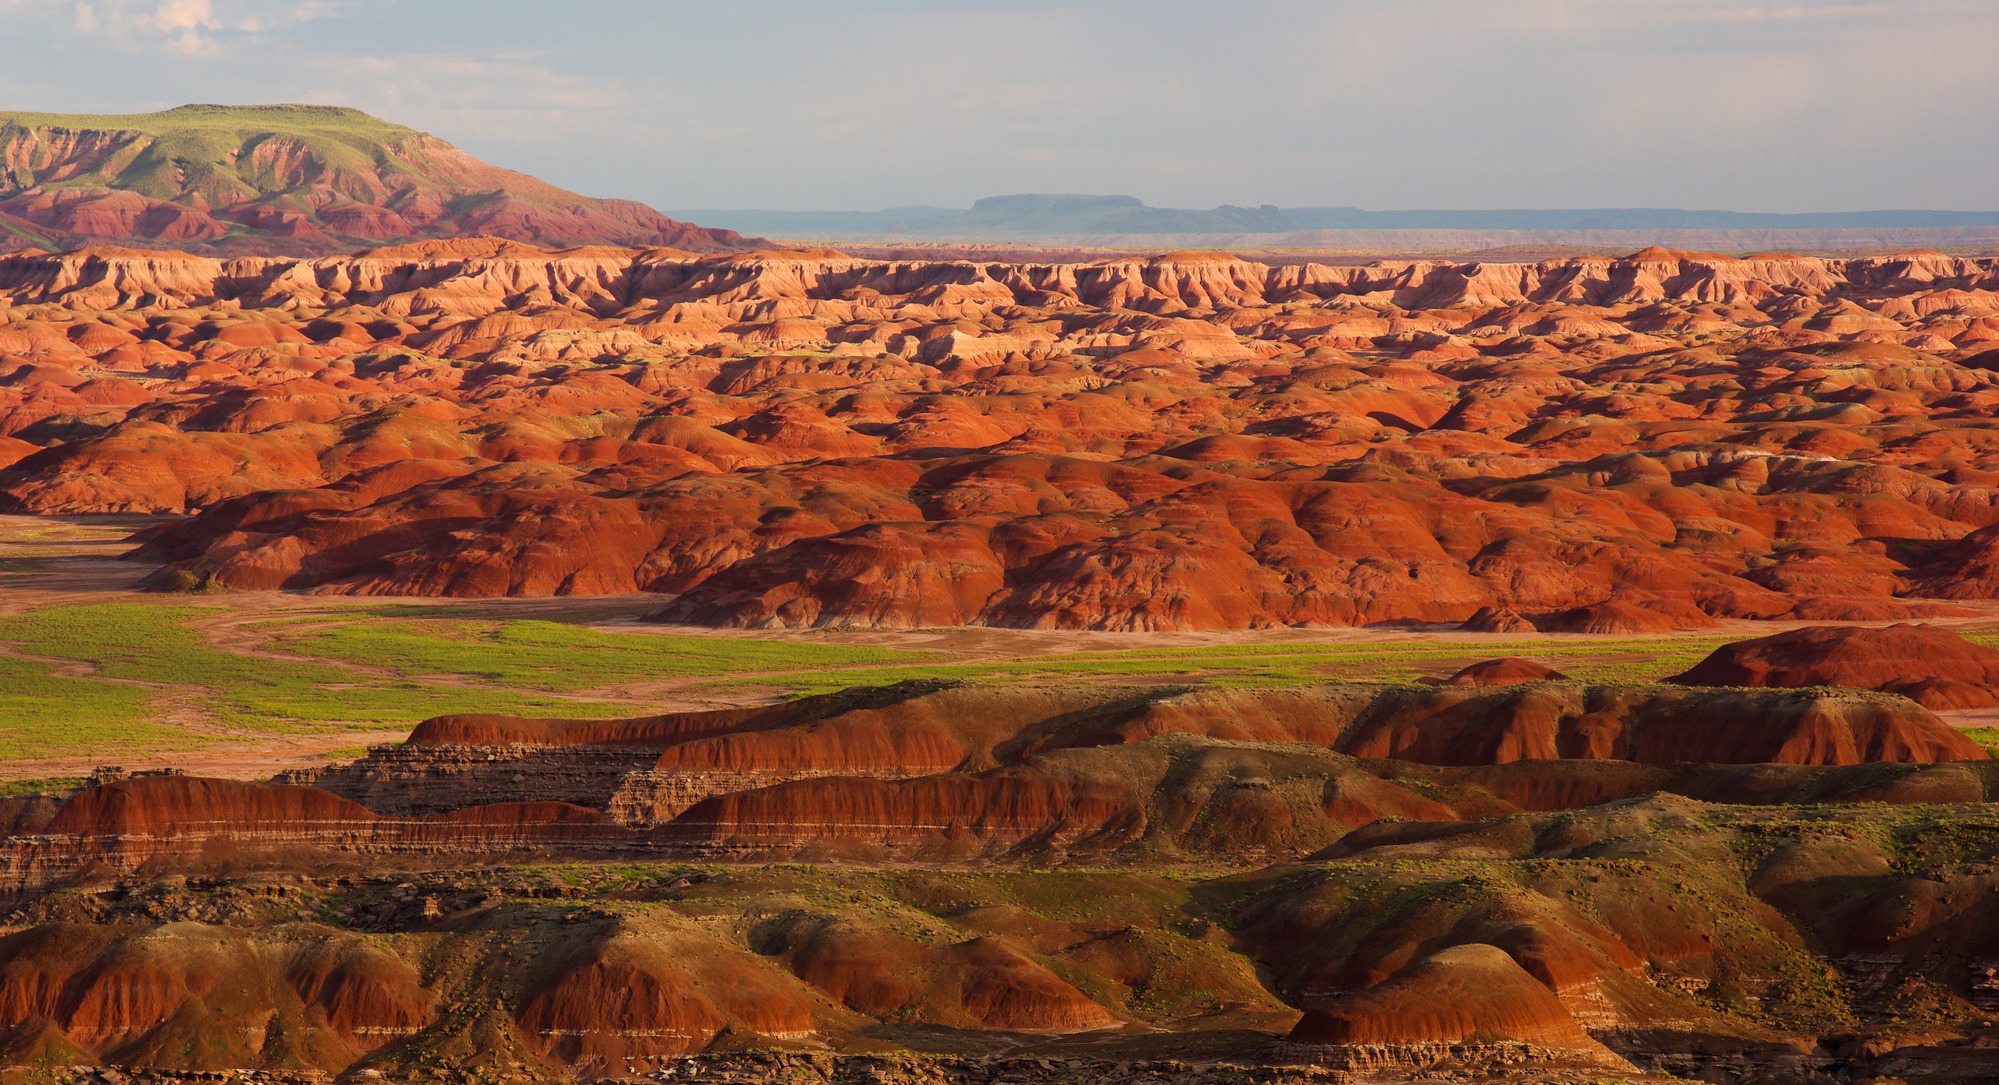 Red badlands with green grassy lowlands